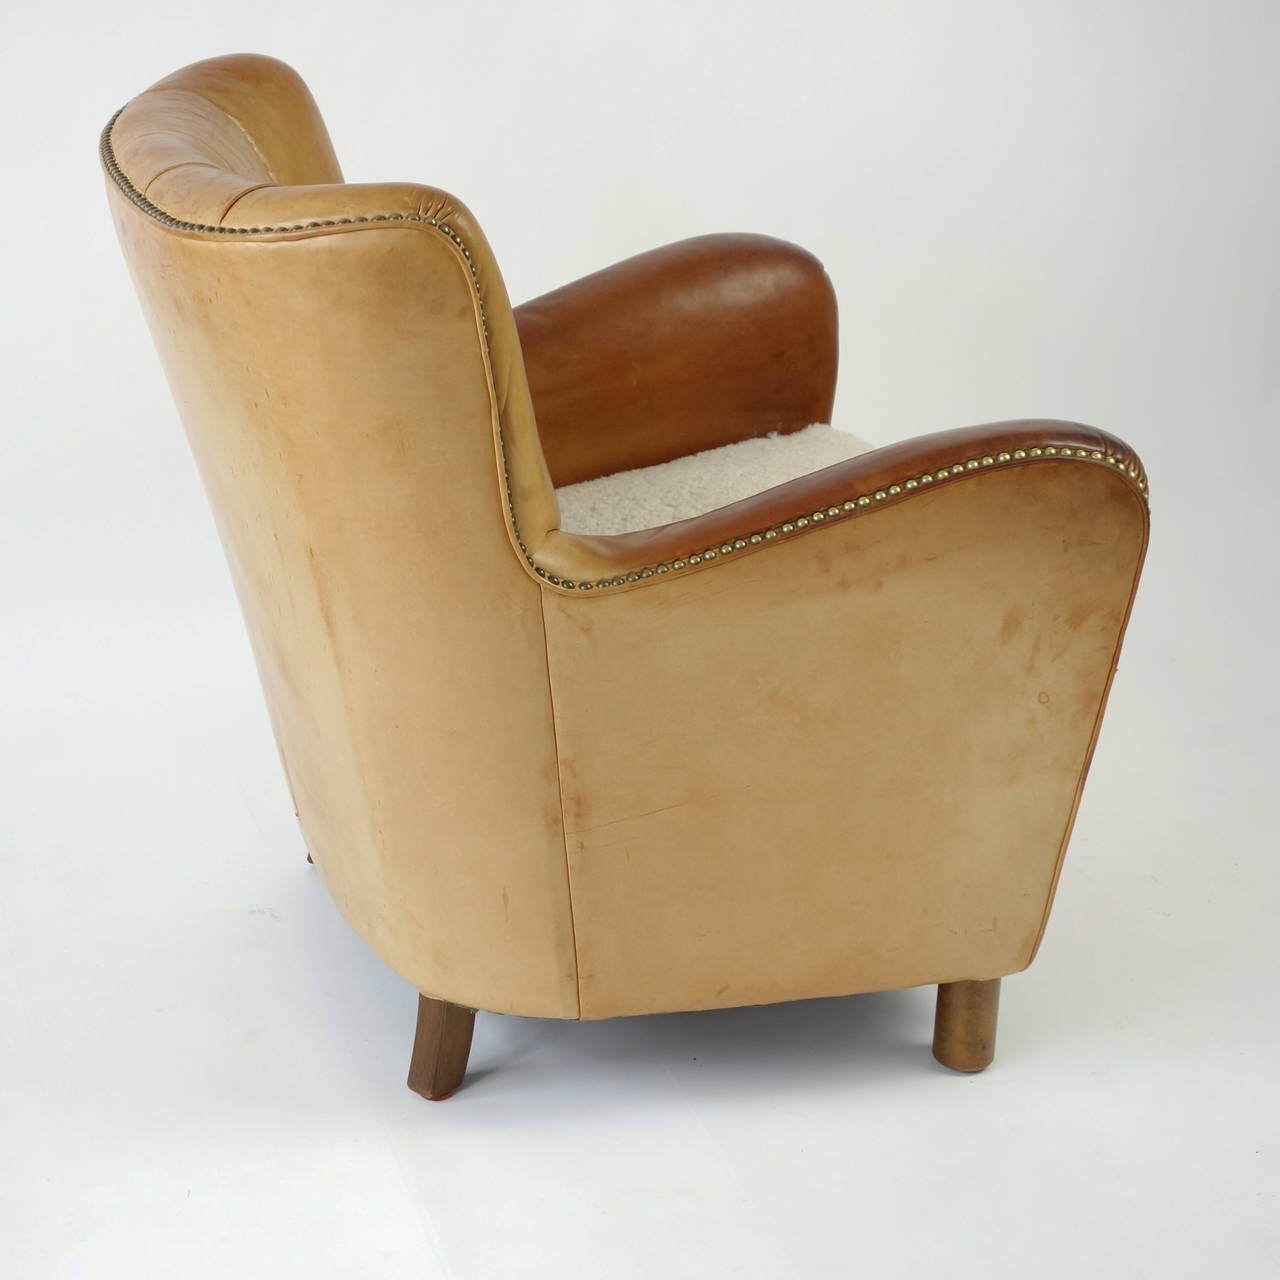 20th Century Flemming Lassen Attributed Leather Easy Chair, Denmark, 1930s